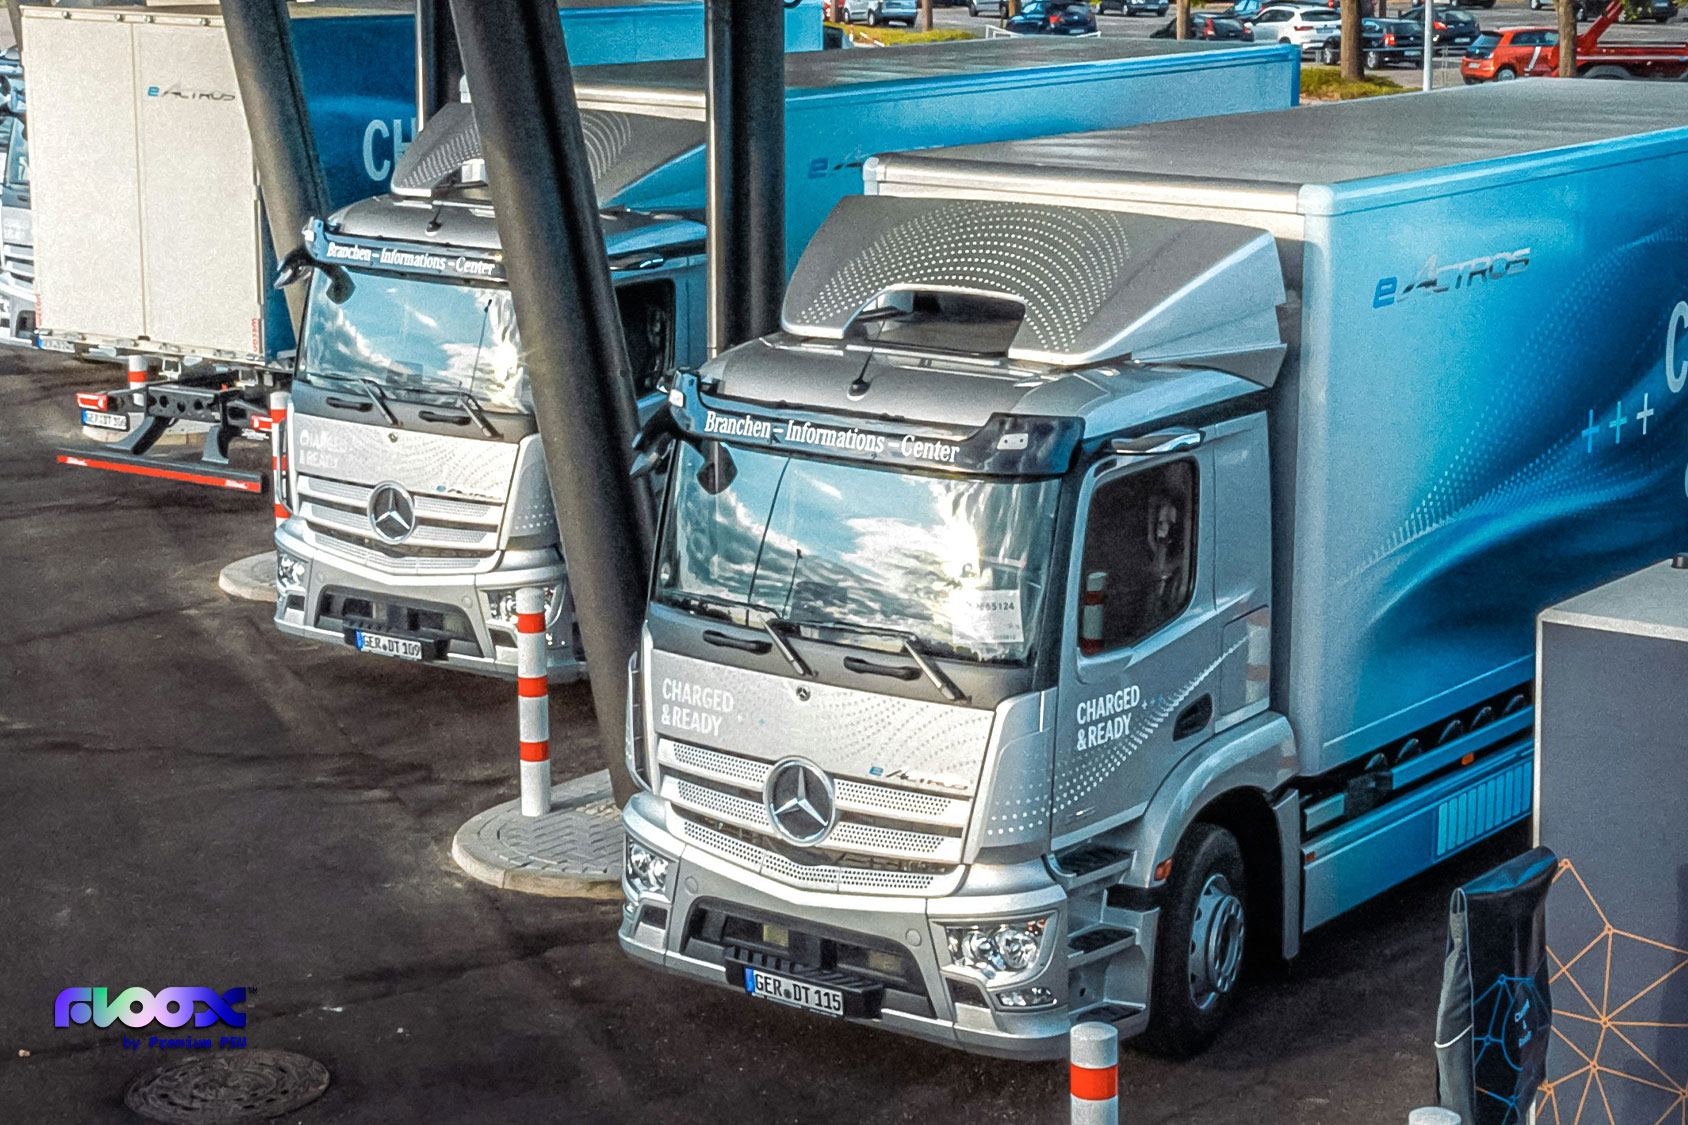 Electric trucks: the next step towards electric mobility